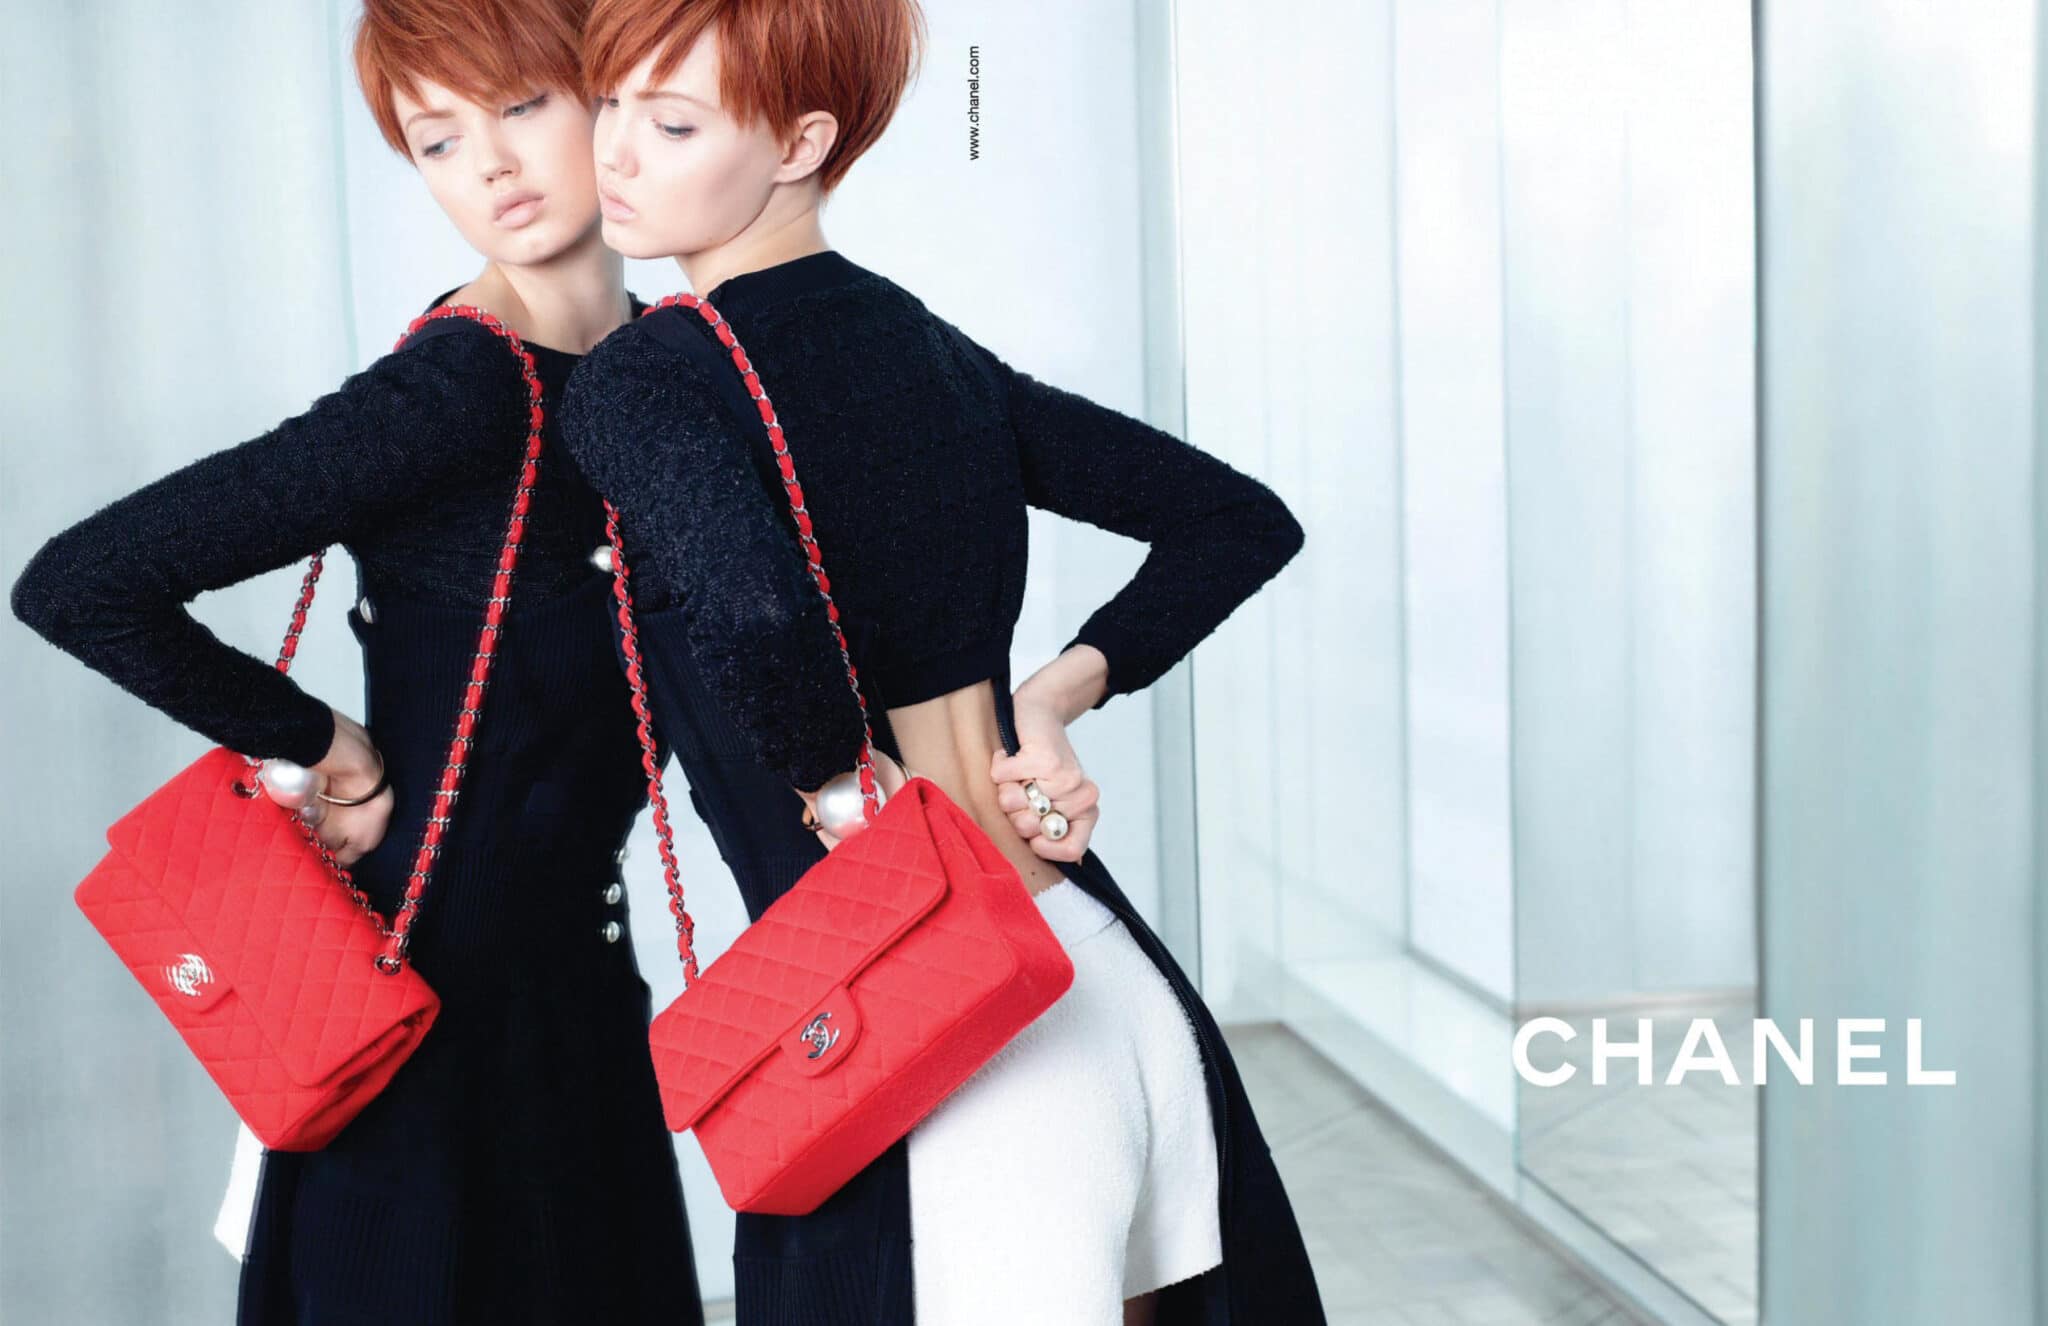 Chanel Spring Summer 2014 Ad Campaign - More Photos 4